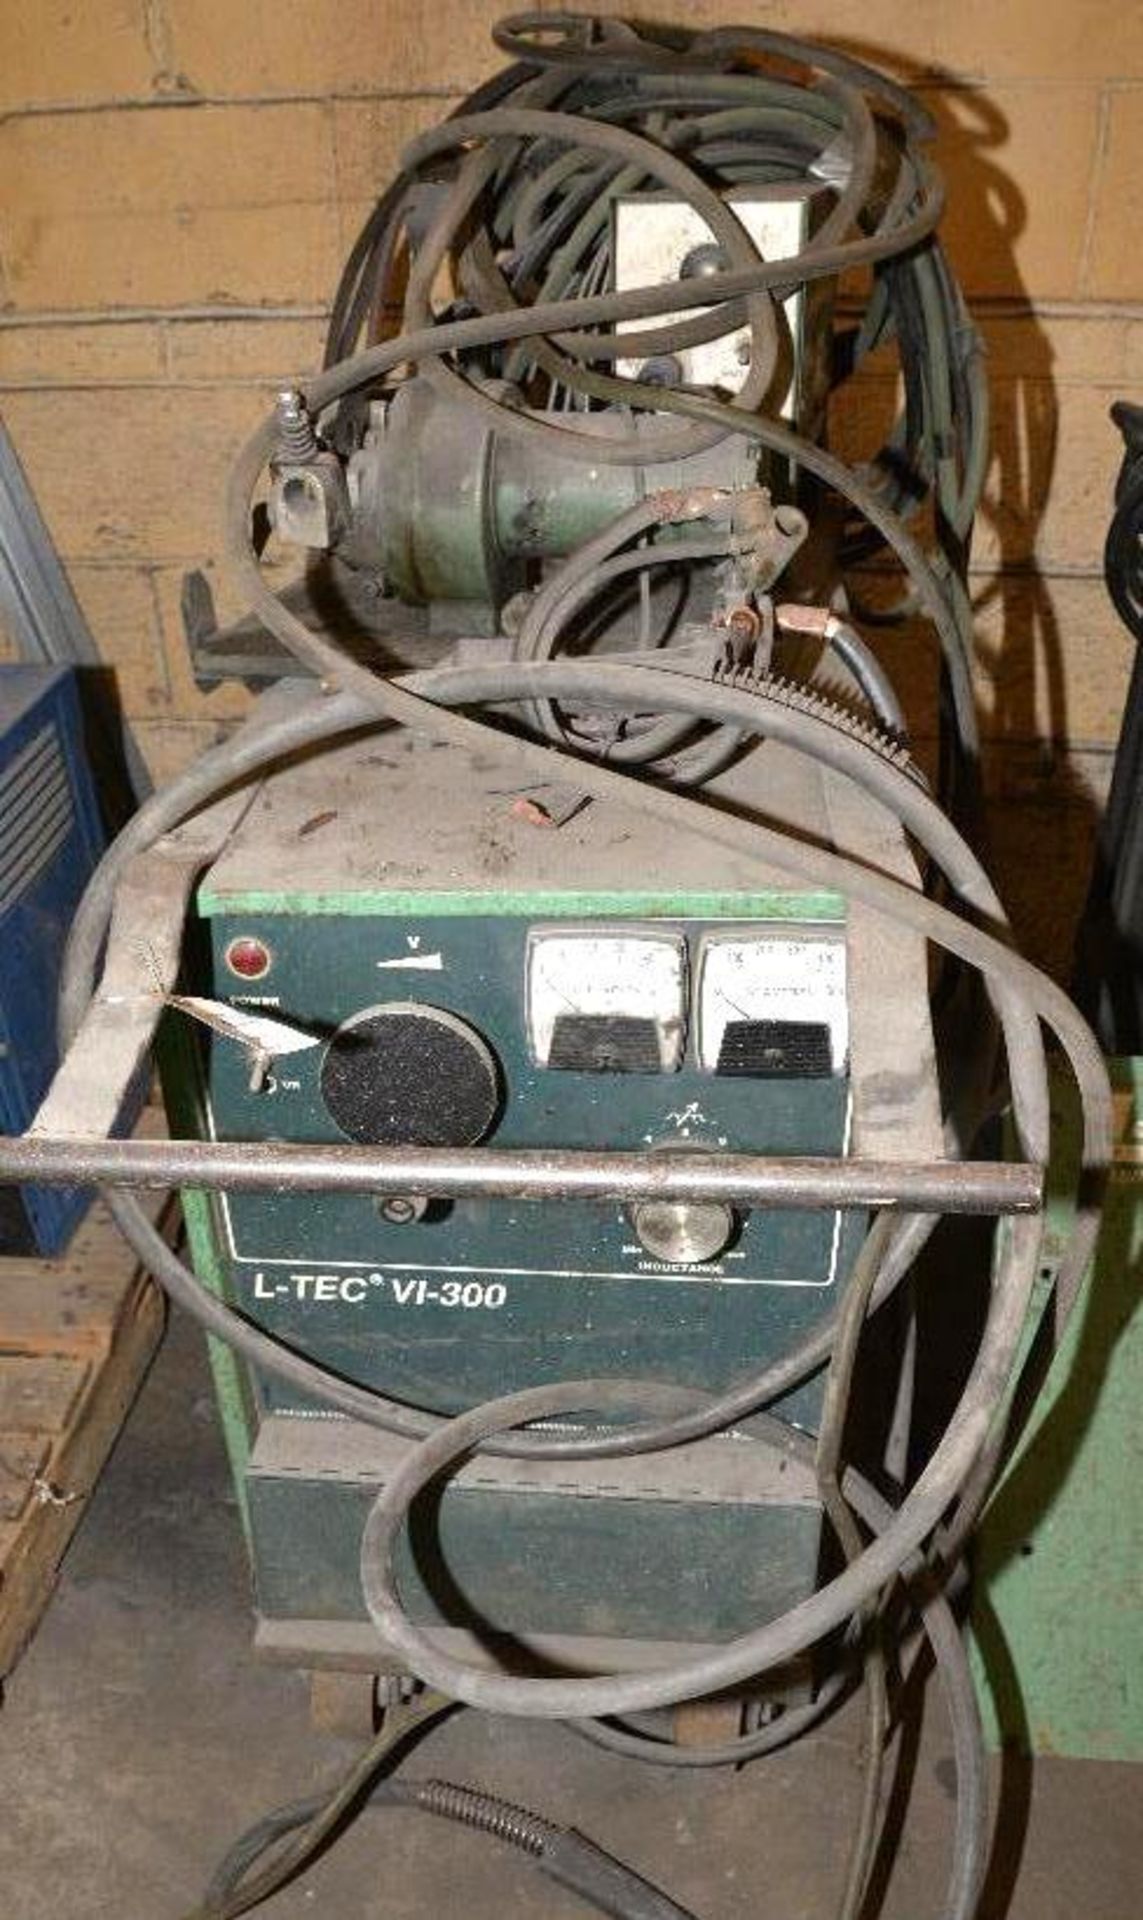 L-TEC V1-300 WELDING AND CUTTING SYSTEMS NIG WELDER ON TOP- PIE CORD- CUTTING CABLE- HAS LEADS